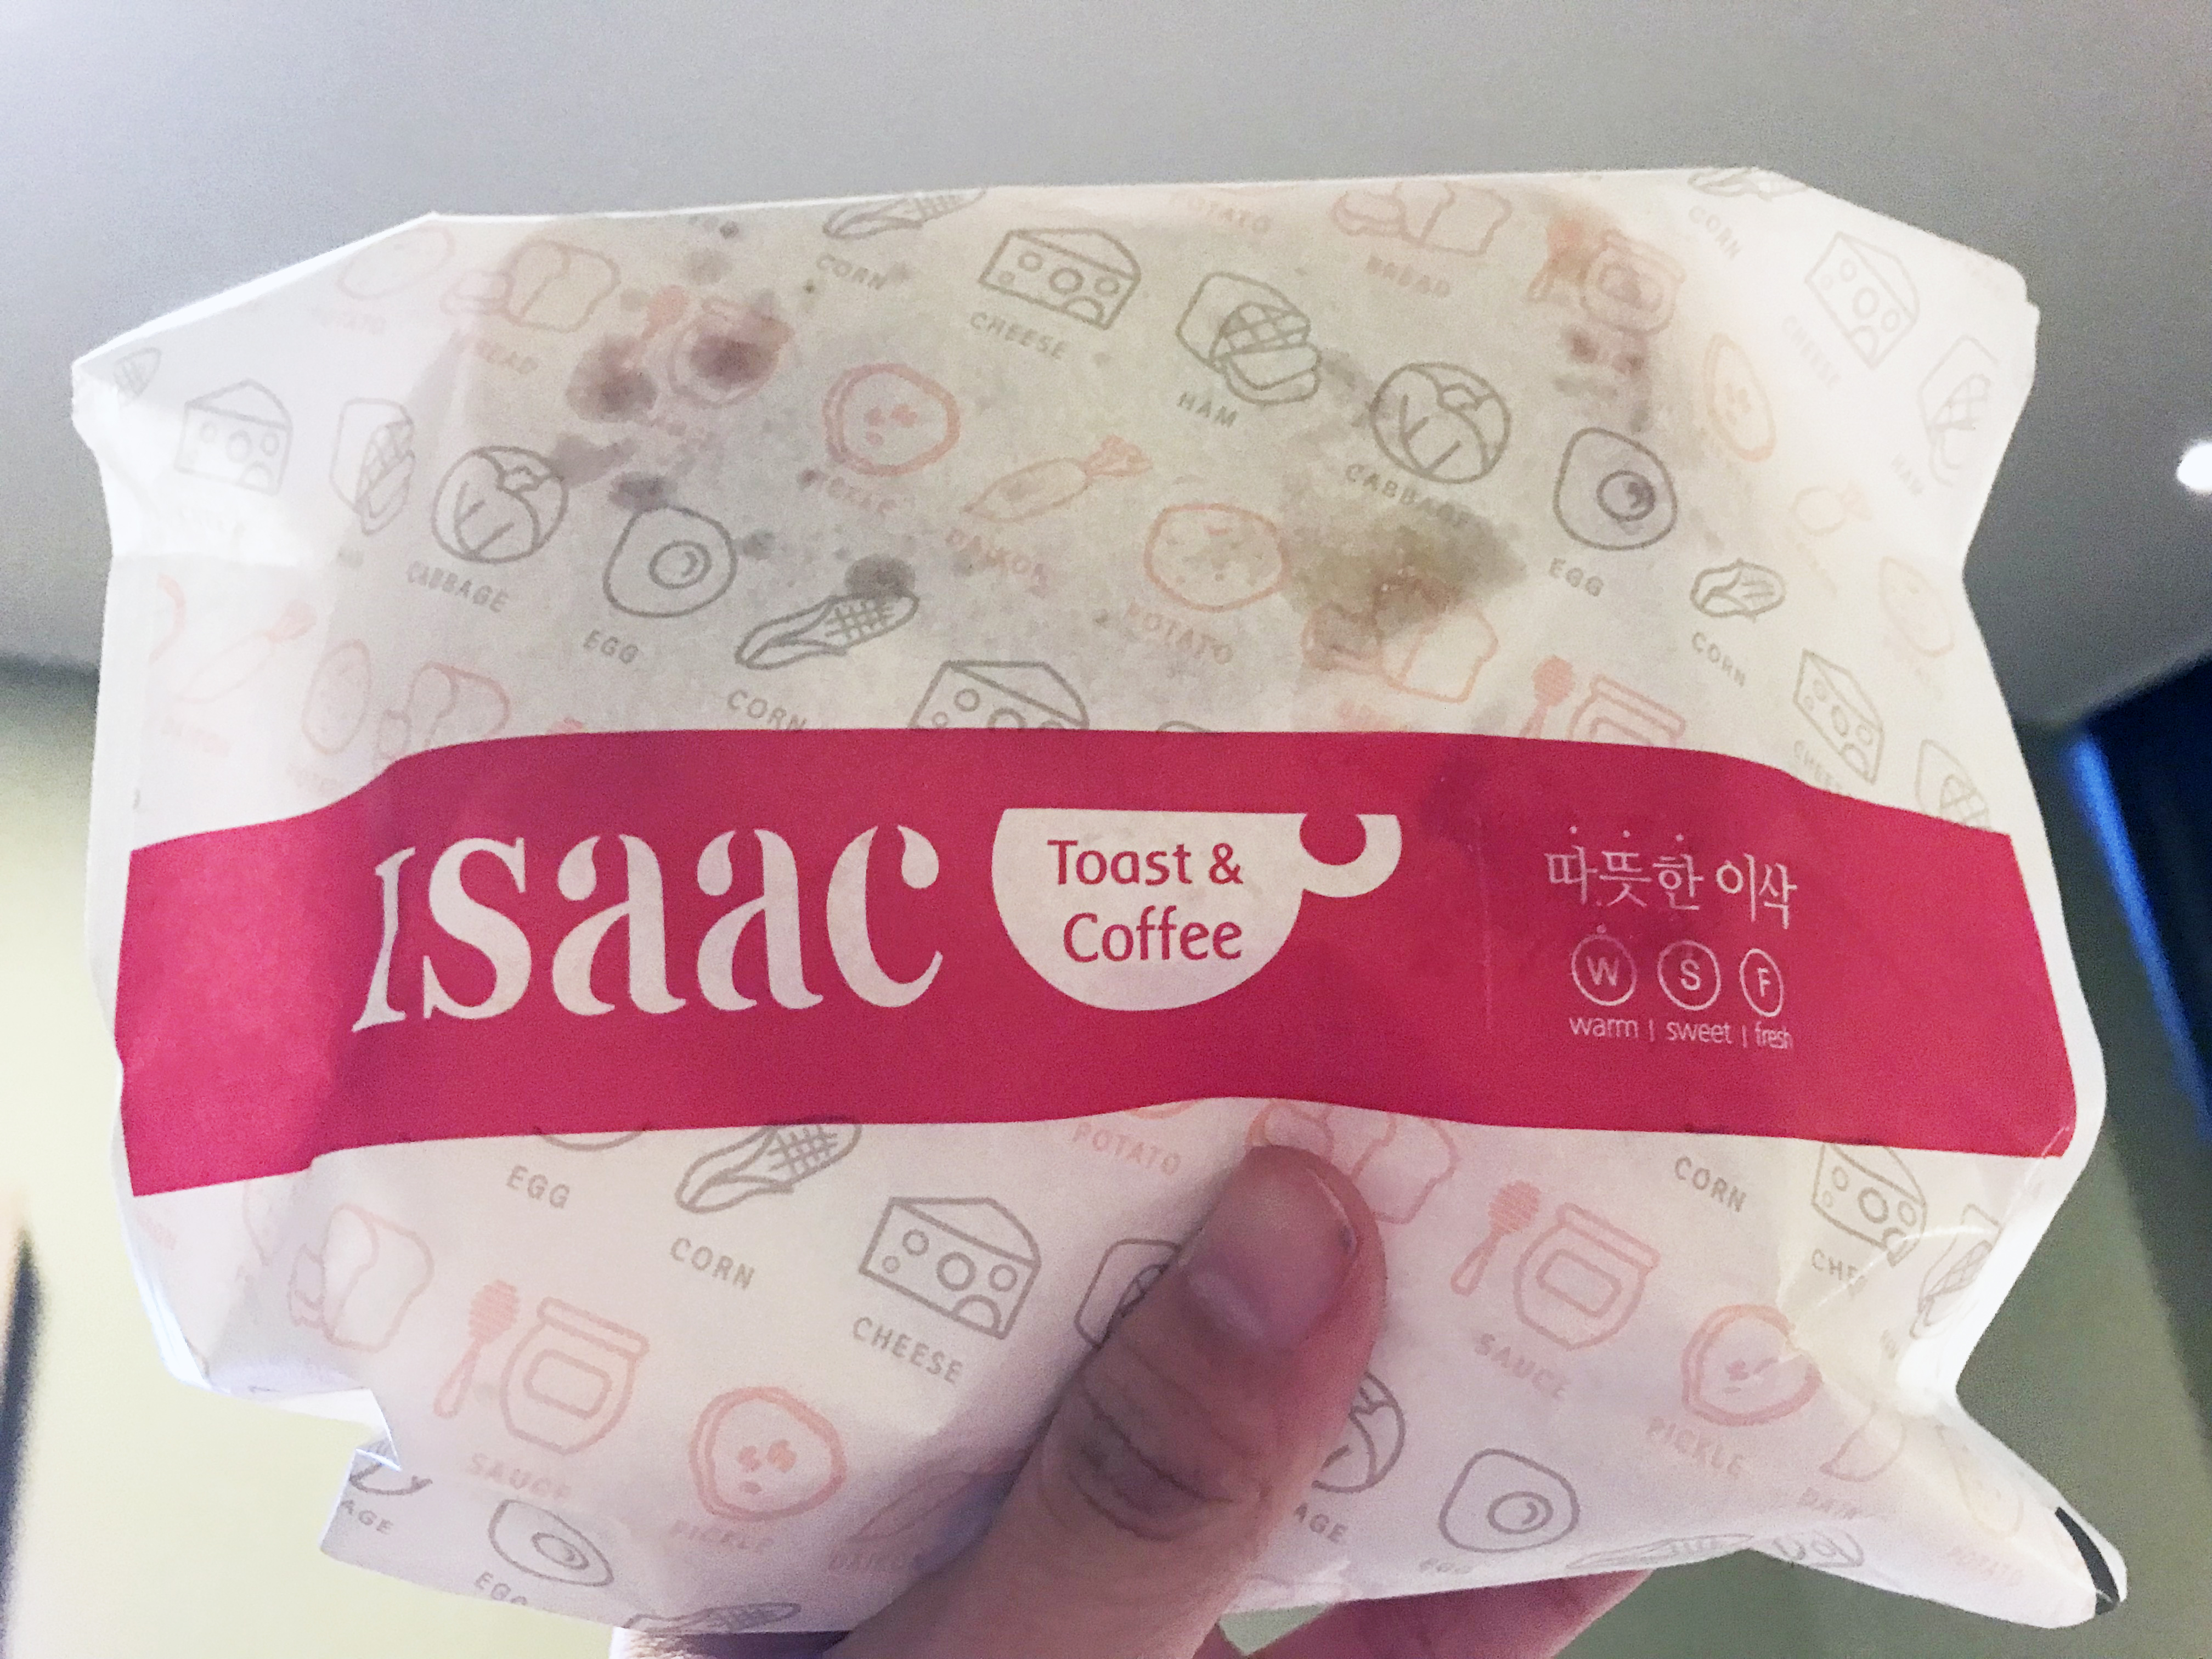 Isaac Toast: the most hyped toast in Korea!